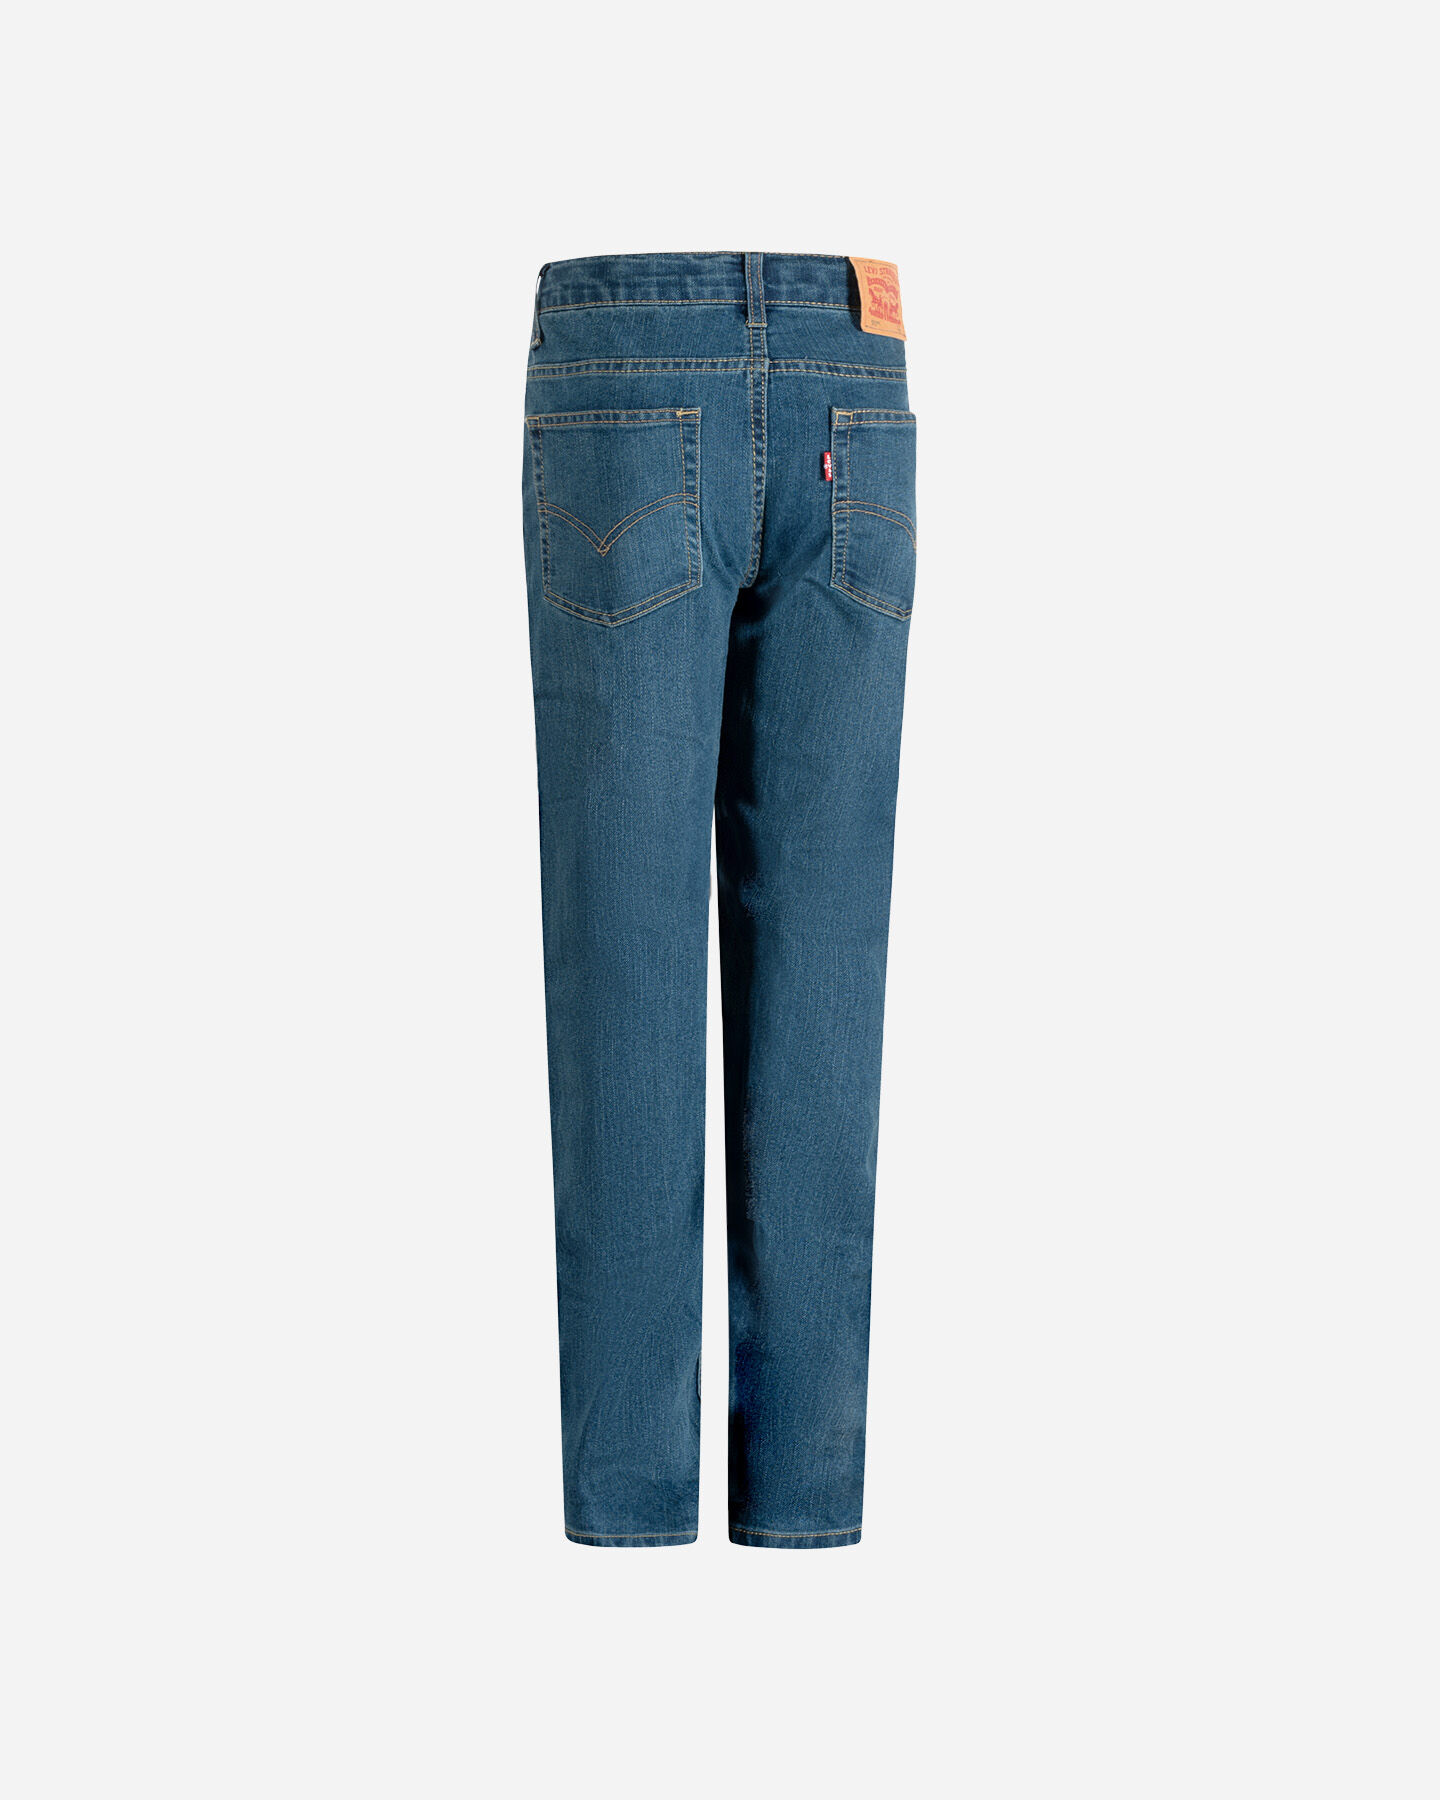  Jeans LEVI'S 511 SLIM FIT JR S4126688|M8N|10 scatto 1